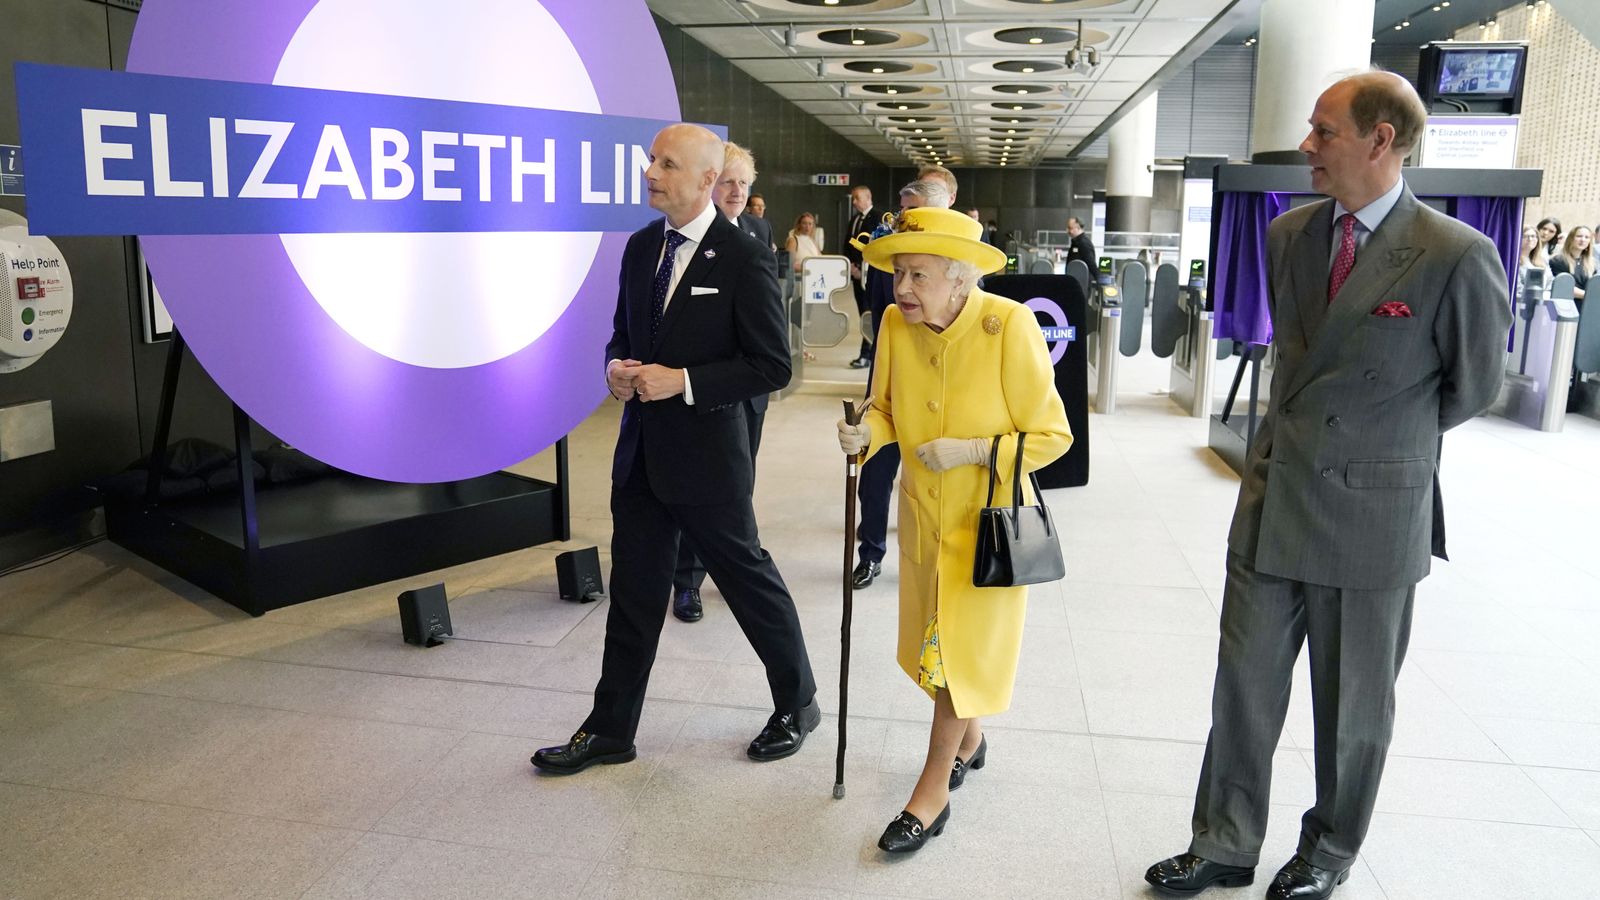 Smiling Queen uses oyster card as she makes surprise appearance to see new Elizabeth line in London | UK News